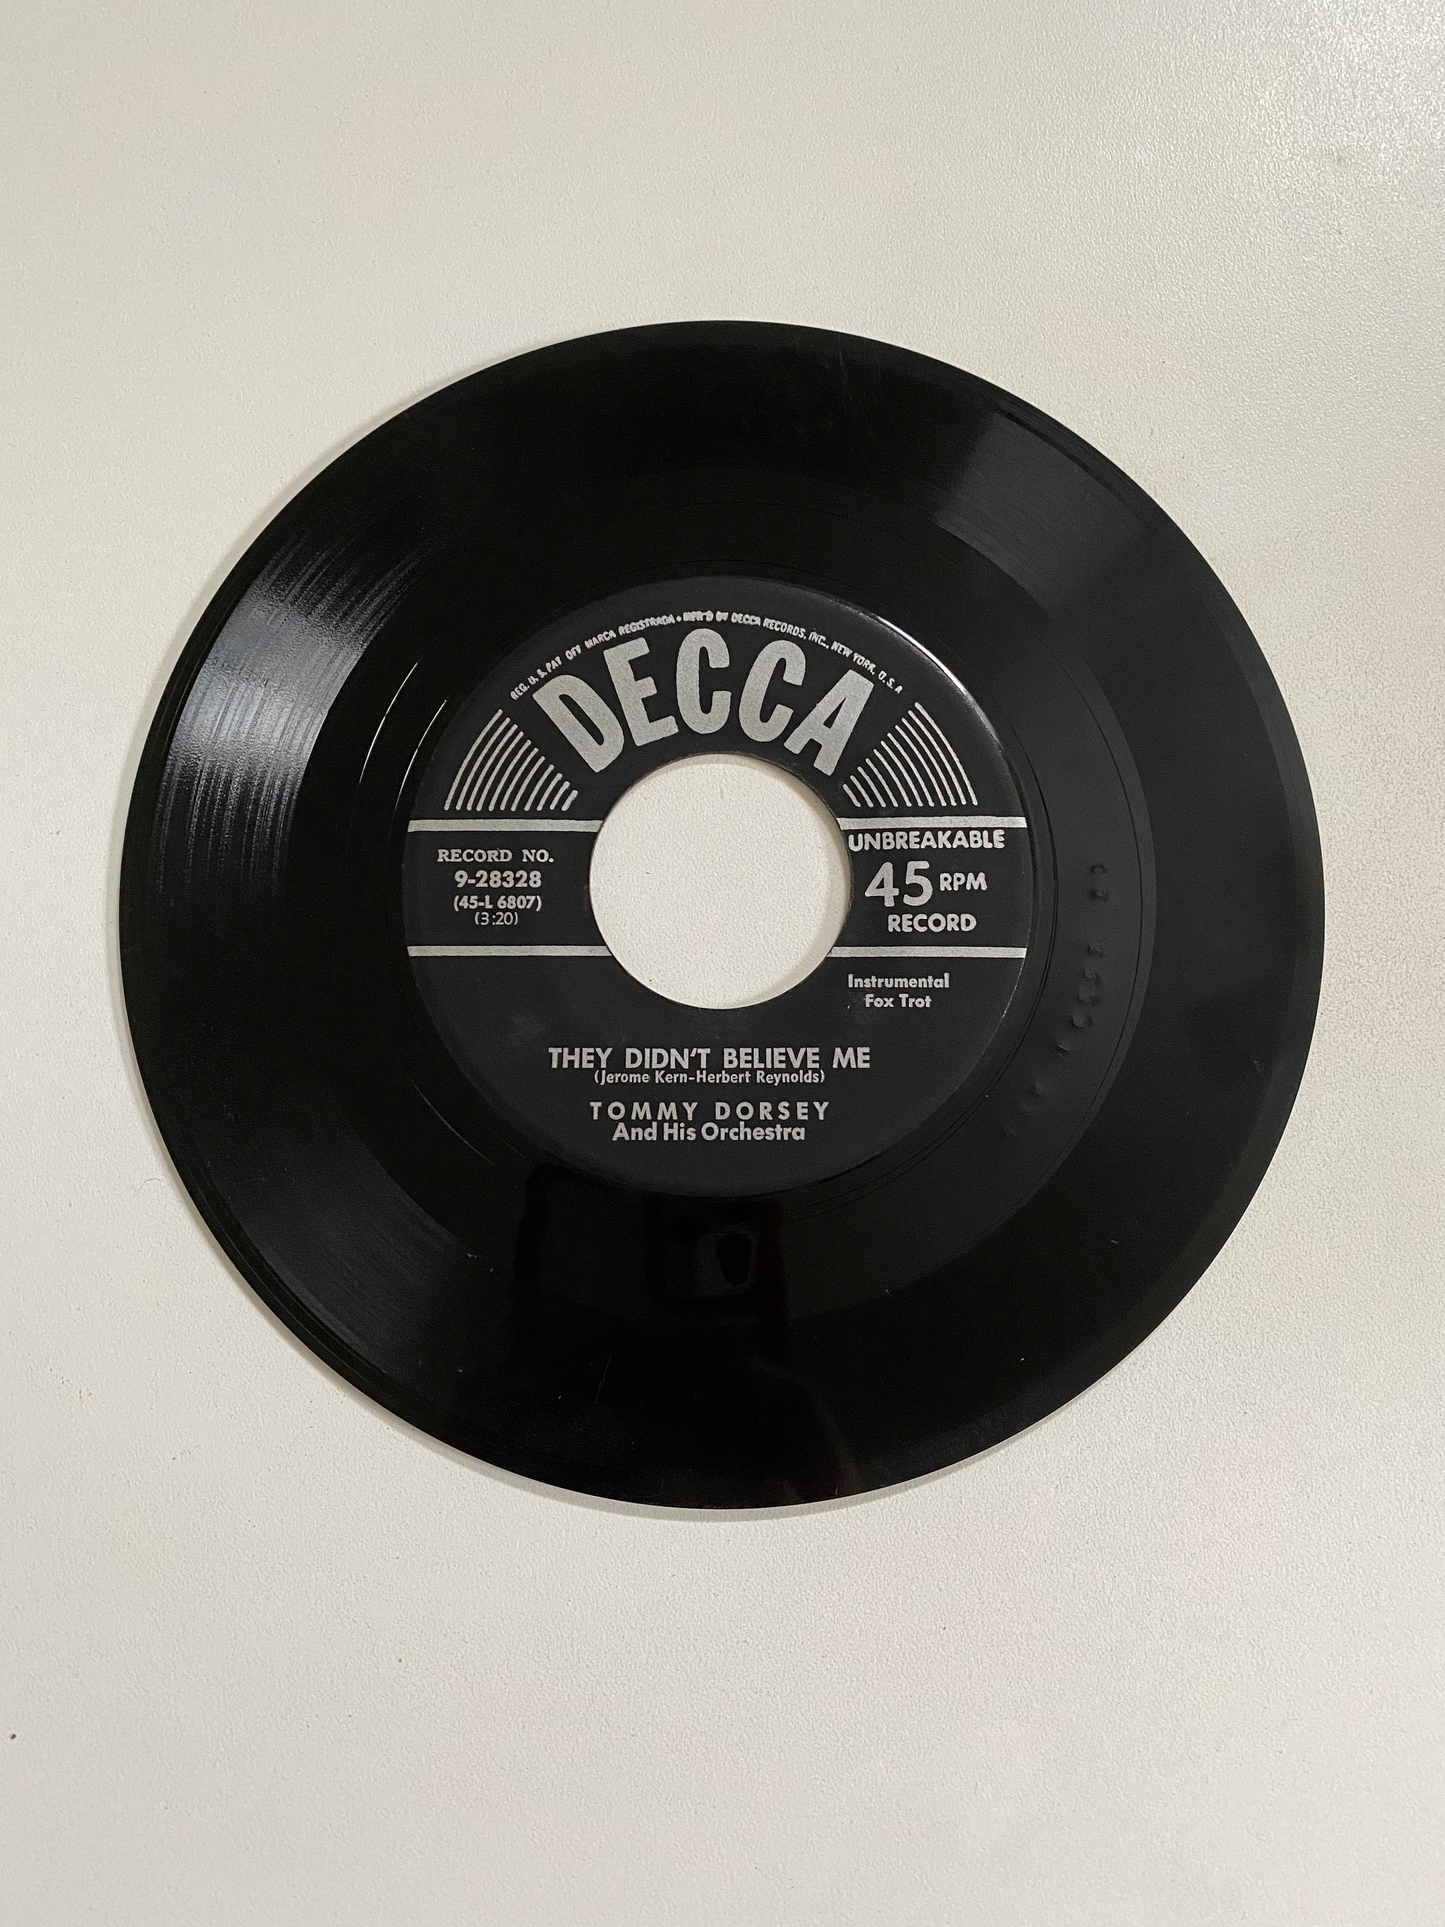 Tommy Dorsey and his Orchestra - Nobody's Seen The Trouble I've Seen | 45 The Vintedge Co.